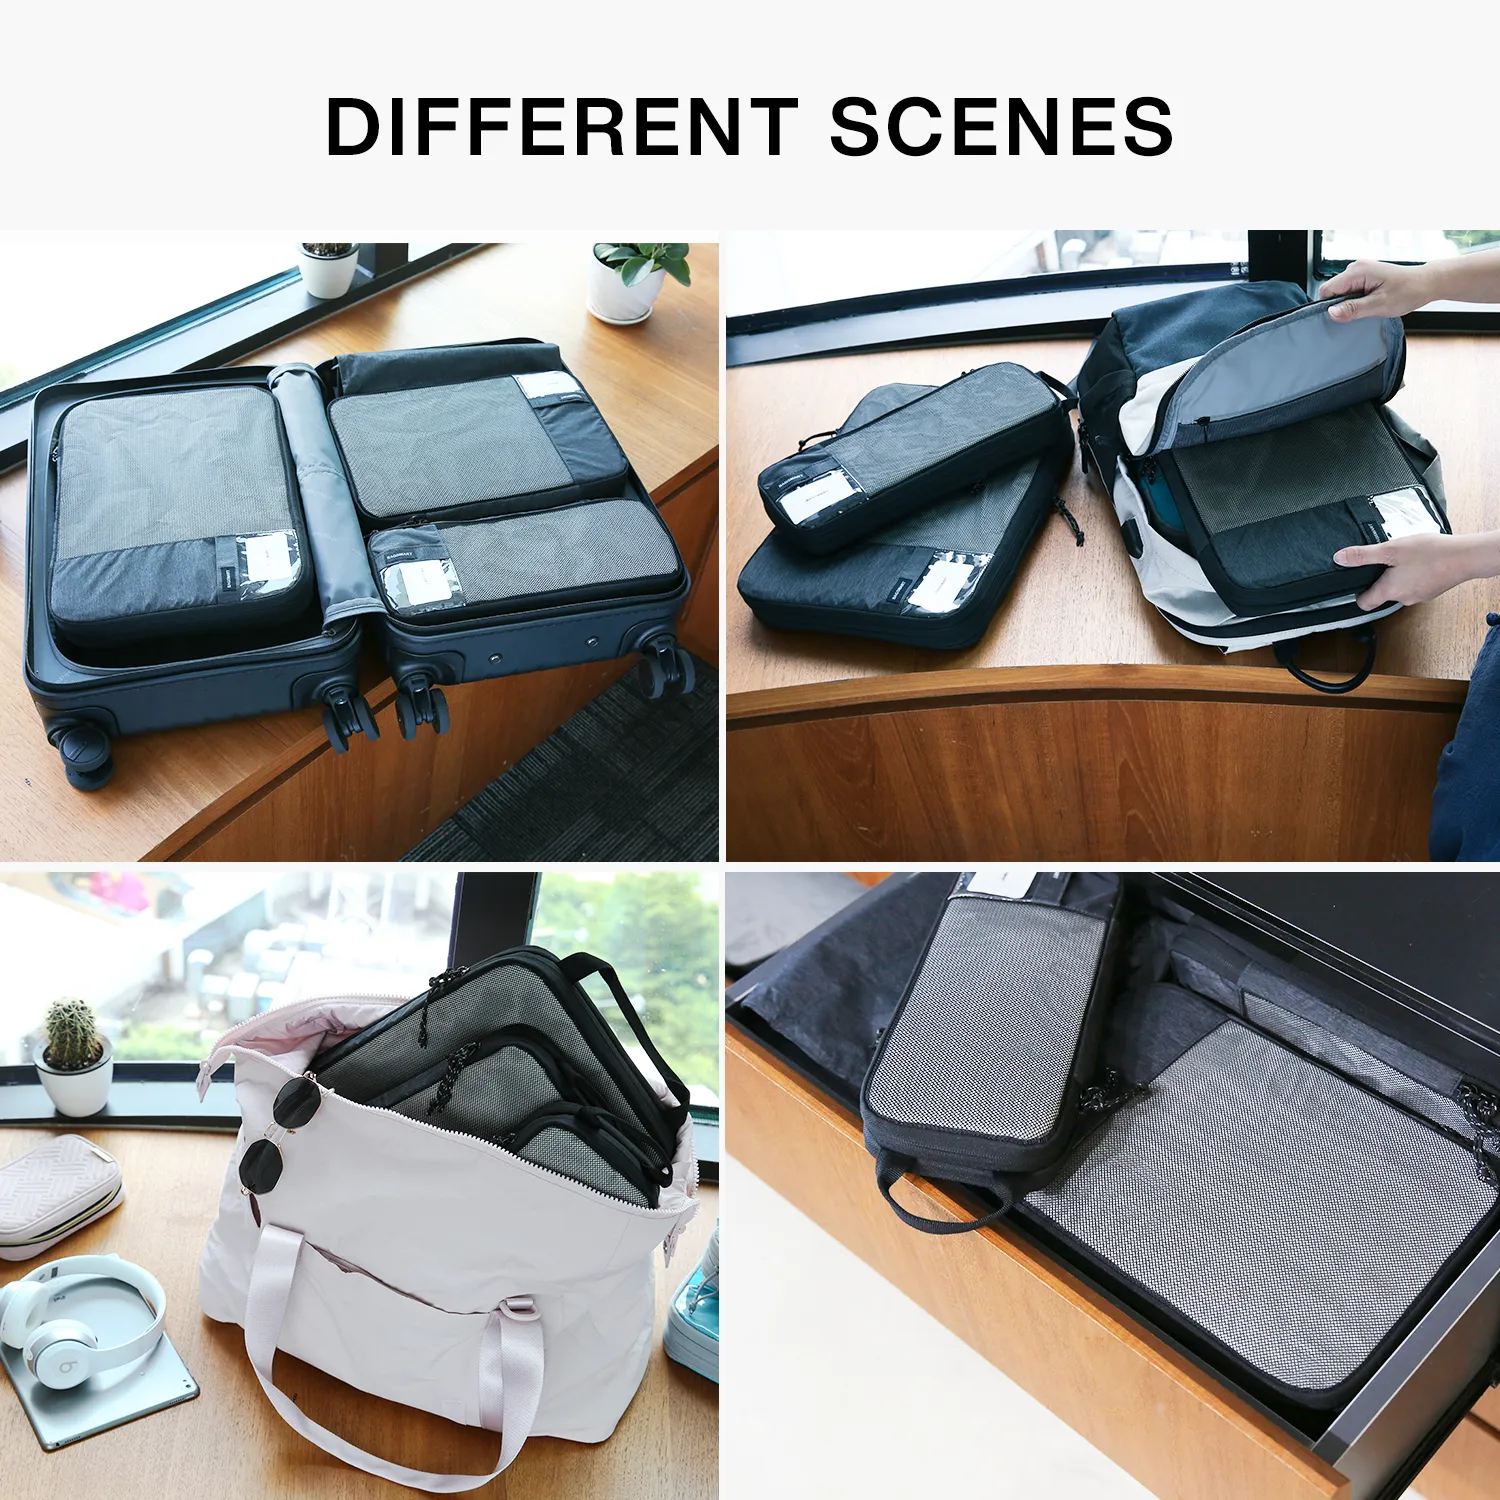 https://juhi.co.uk/wp-content/uploads/2023/10/BAGSMART-Compression-Packing-Cubes-Men-Travel-Expandable-Luggage-Organizer-Carry-on-Luggage-Packing-Organizers-for-Women-1.webp